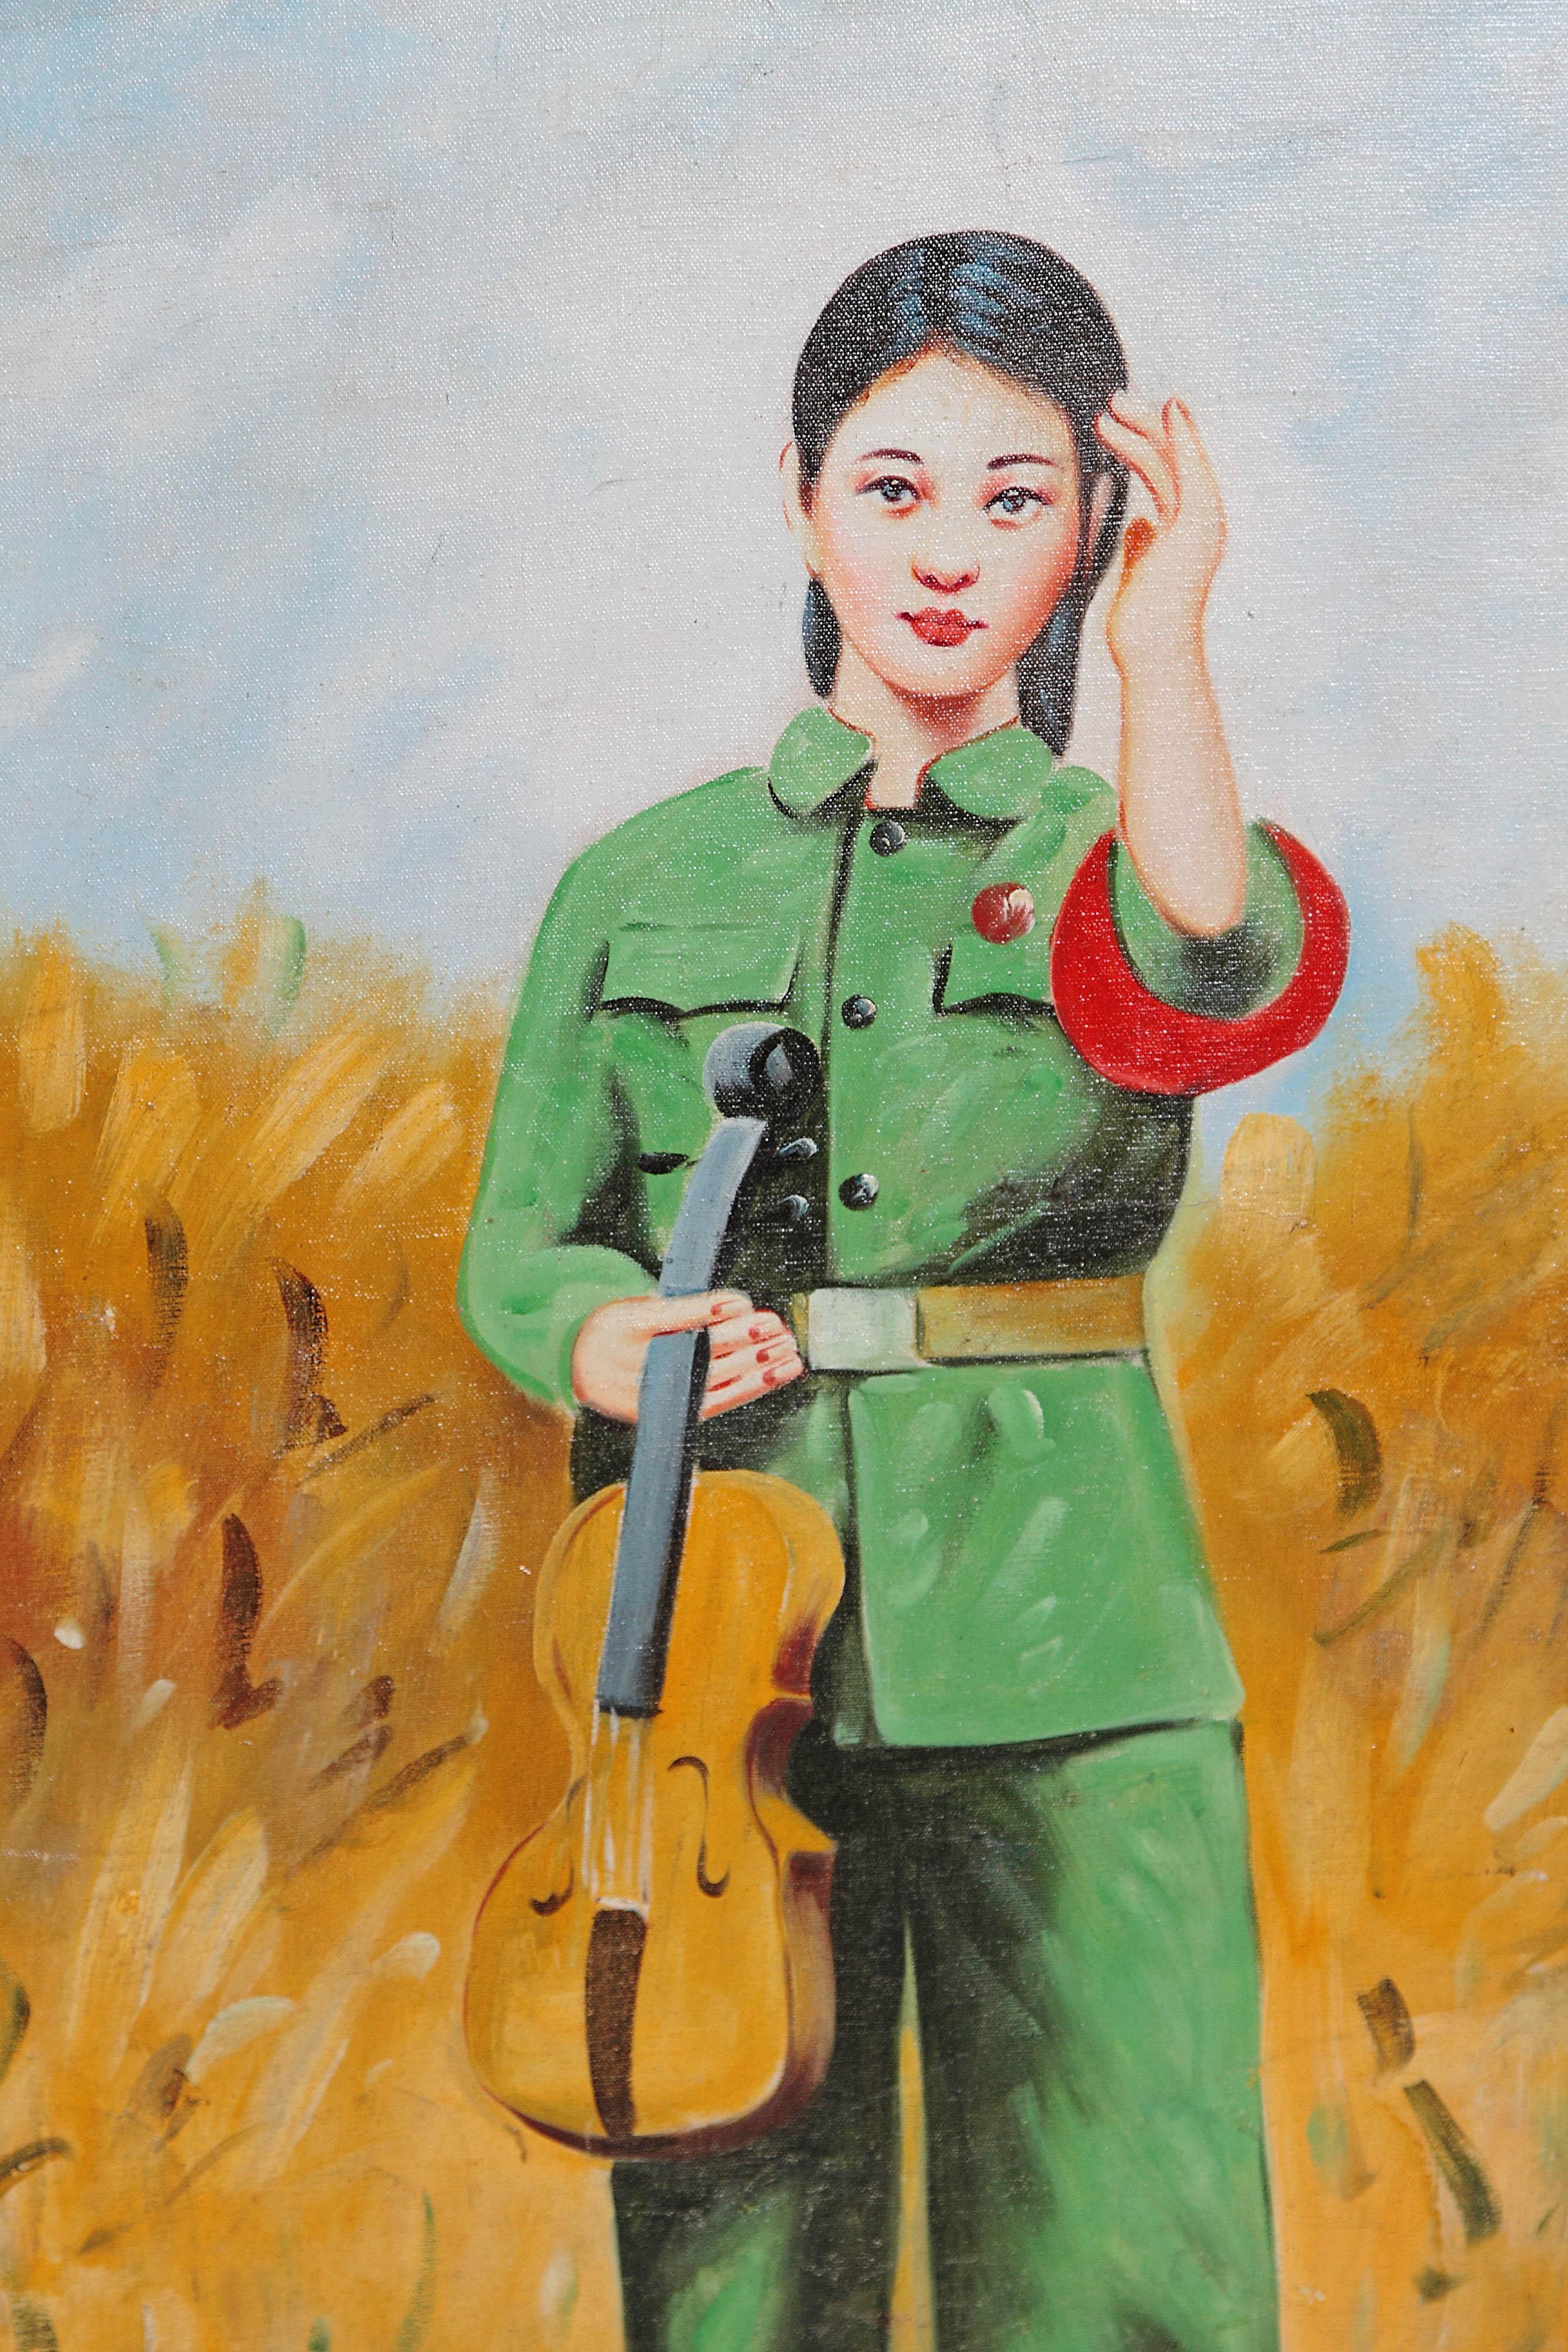 Hand-Painted Chinese Oil Painting of Revolutionary Girl with Violin